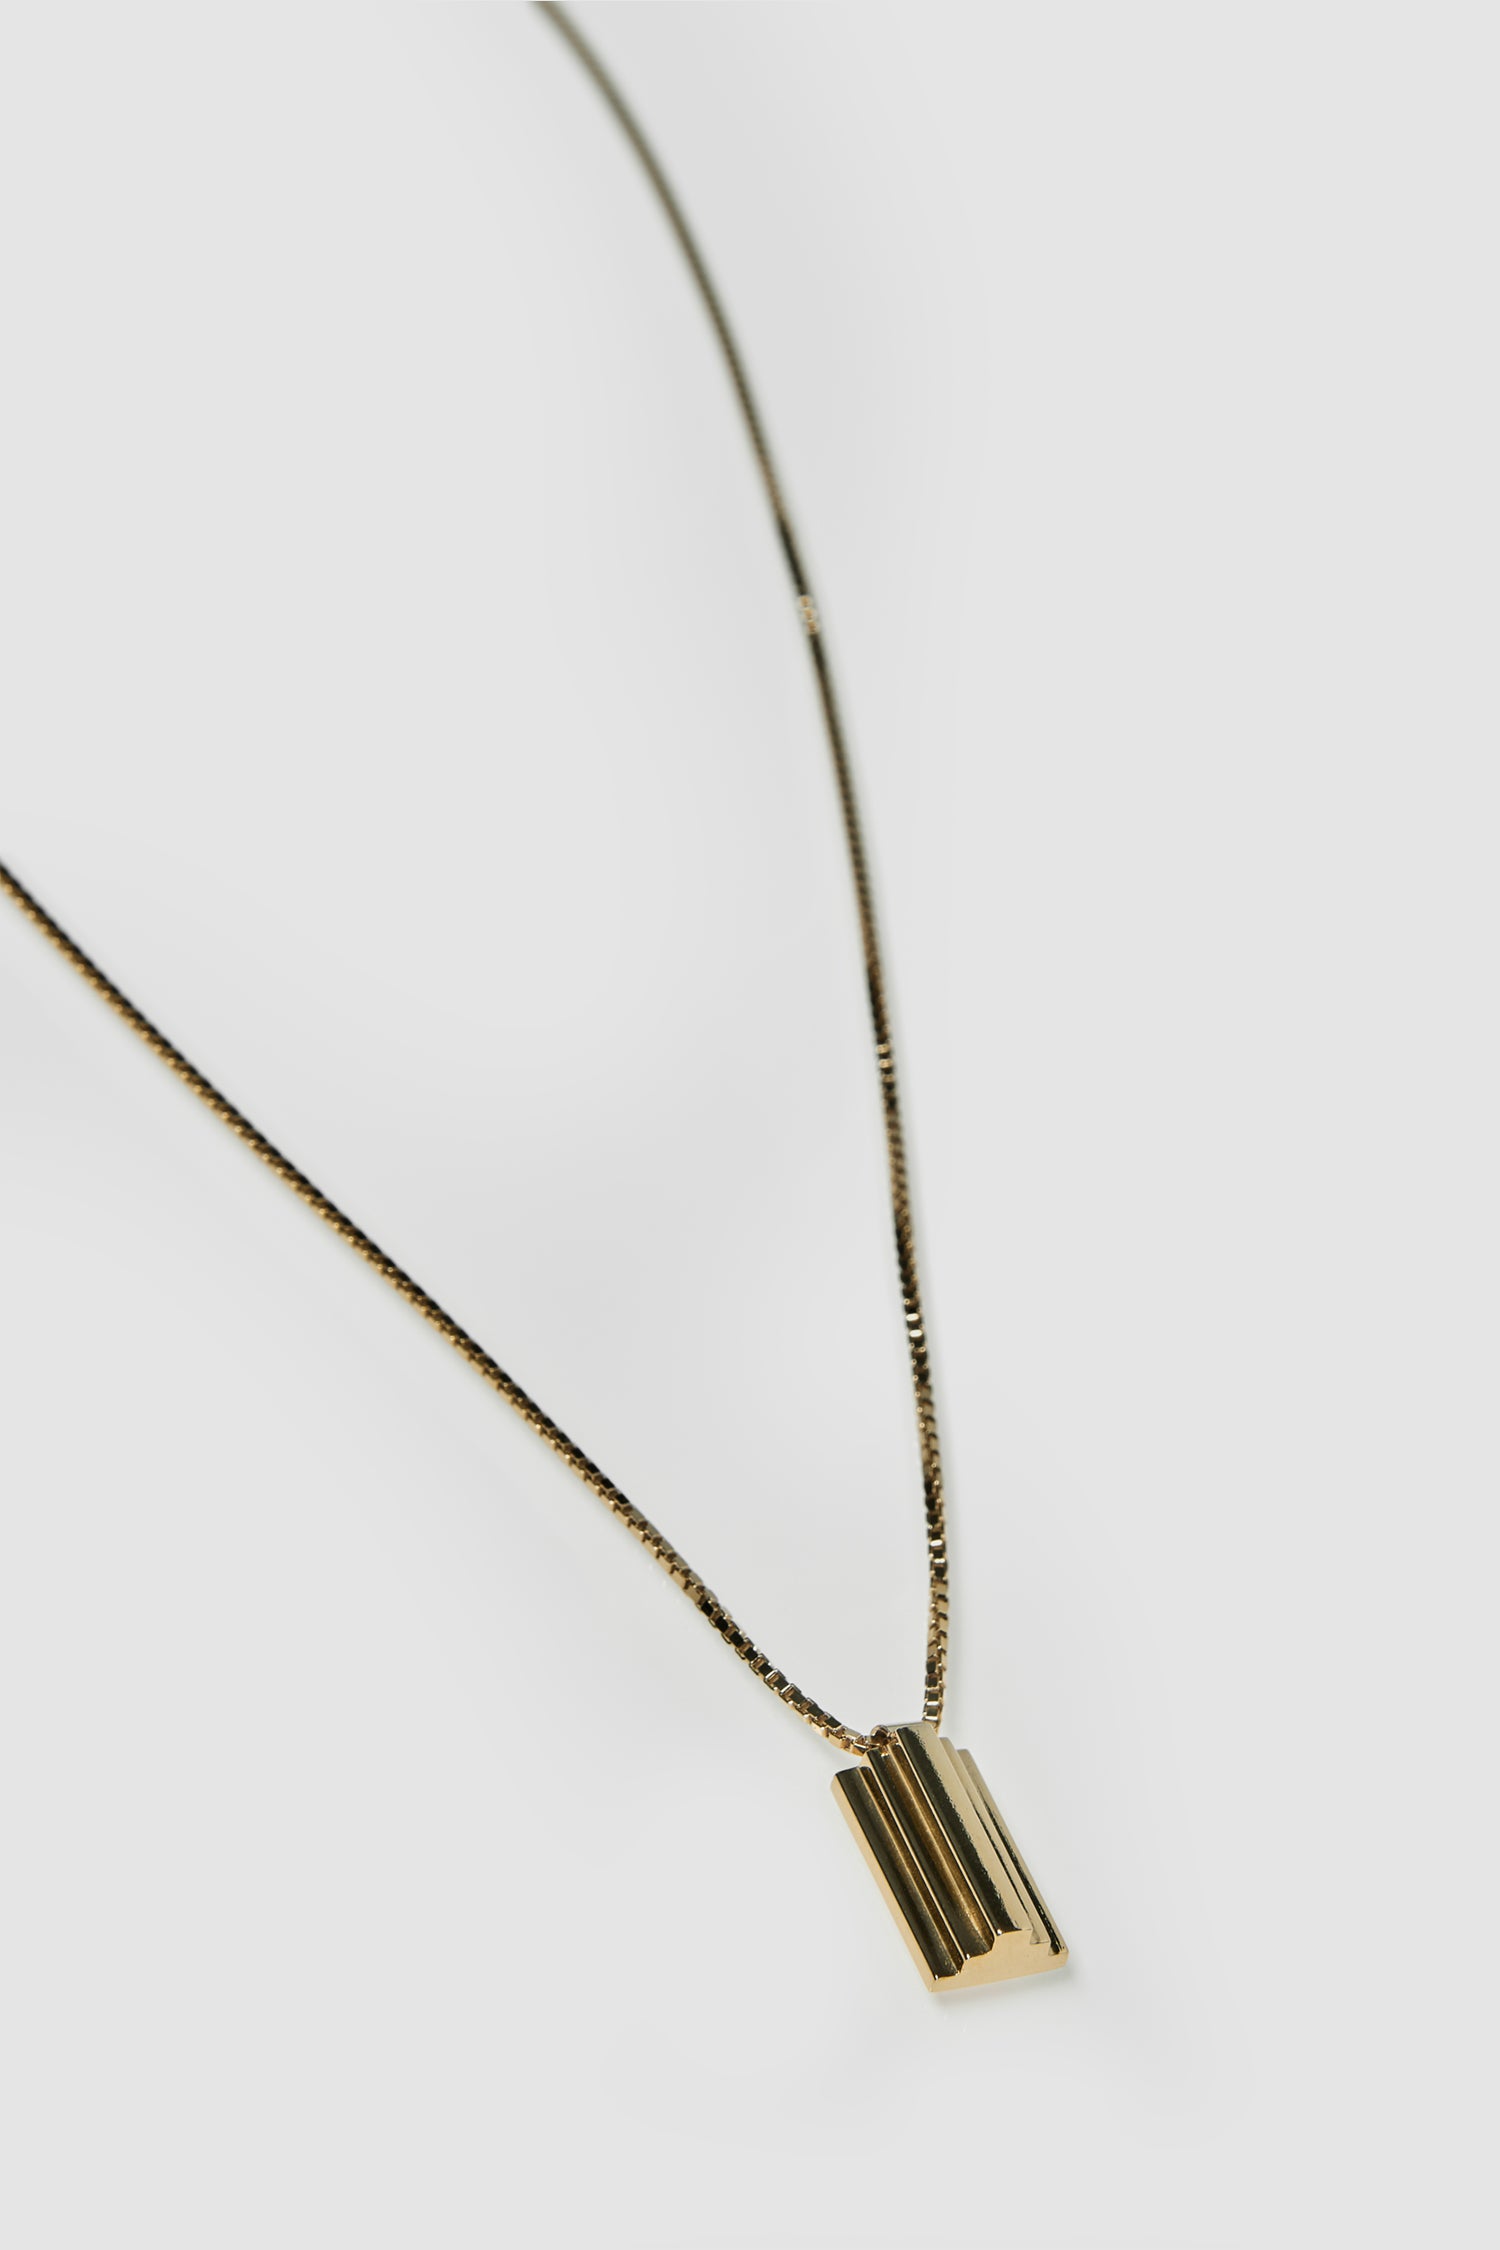 Corbusier Chain - Gold Plated